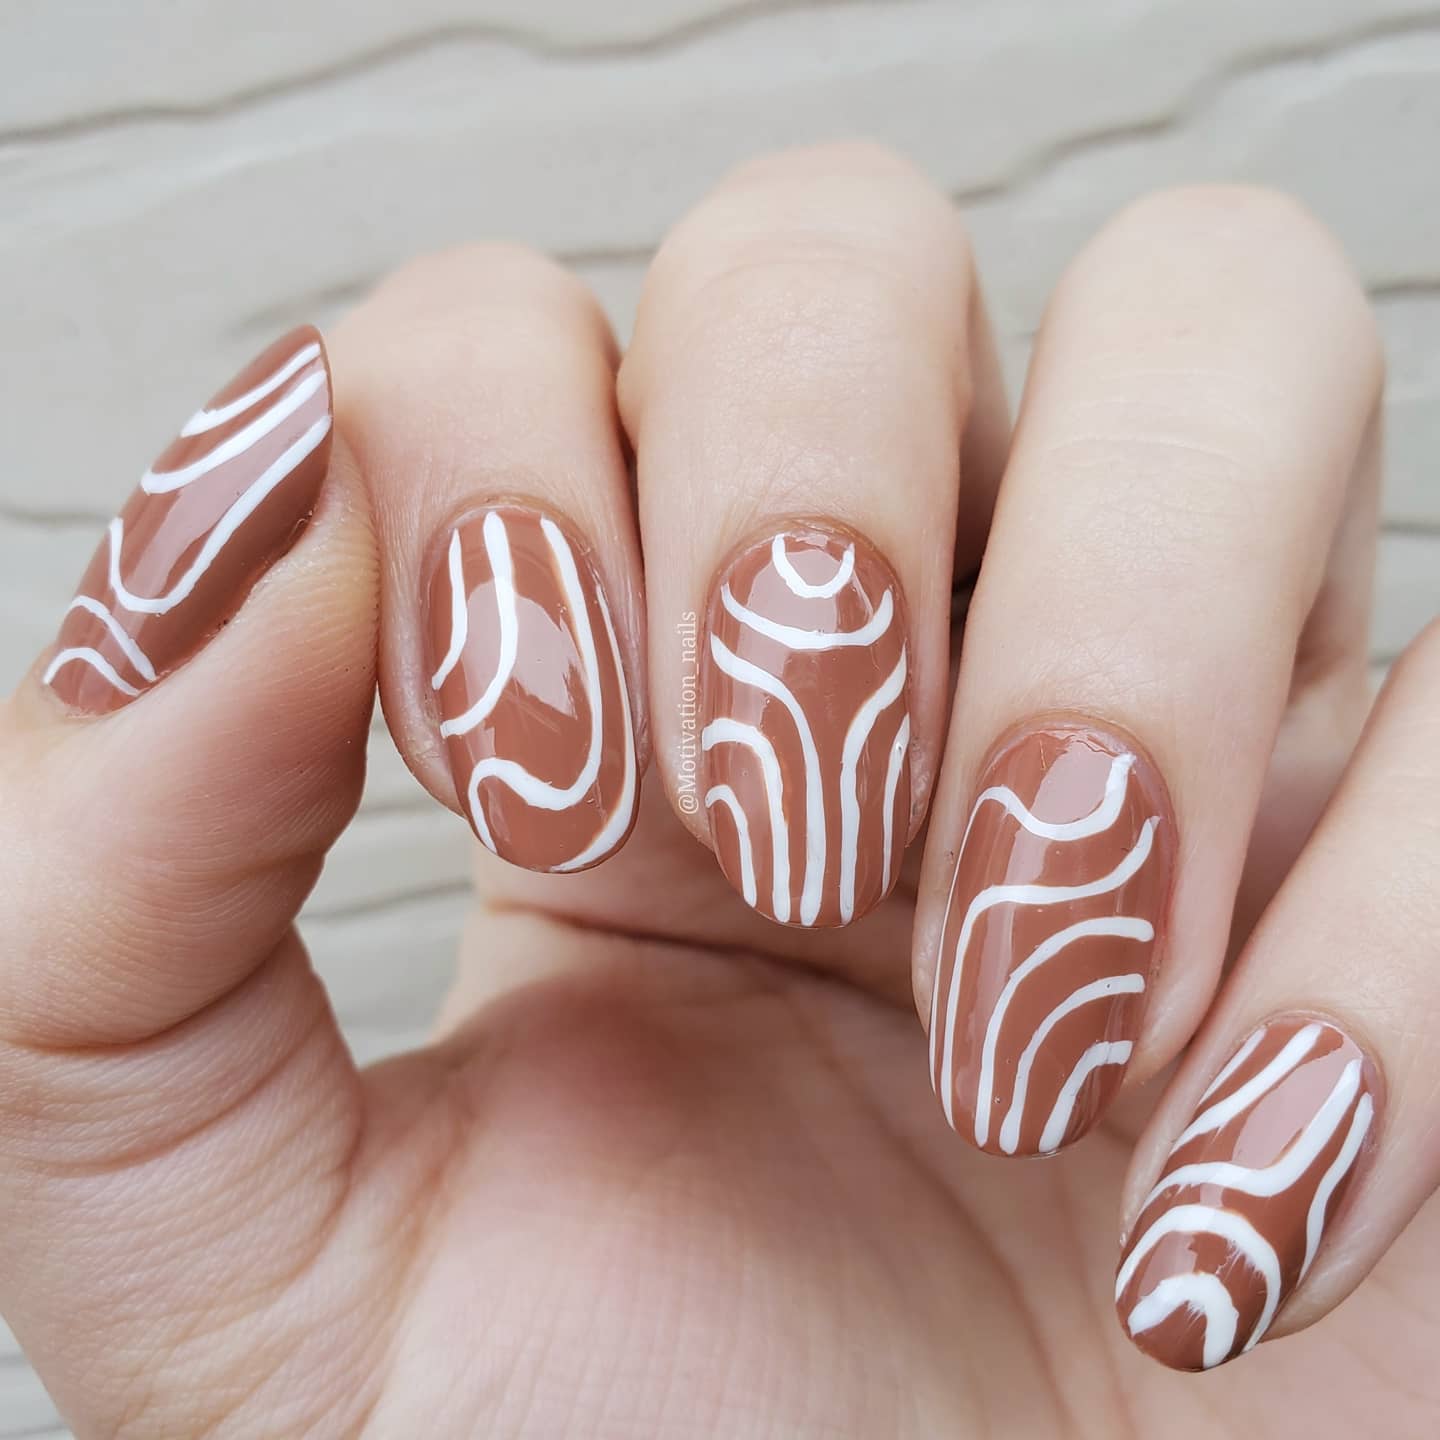 Amazon.com: Fall Short Press on Nails French Tip Fake Nails Medium Length  Hand-Painted Short Nails Glossy Nude with Leaves Designs Acrylic Nails  Brown Nail Tips Full Cover Glue on Nails for Women